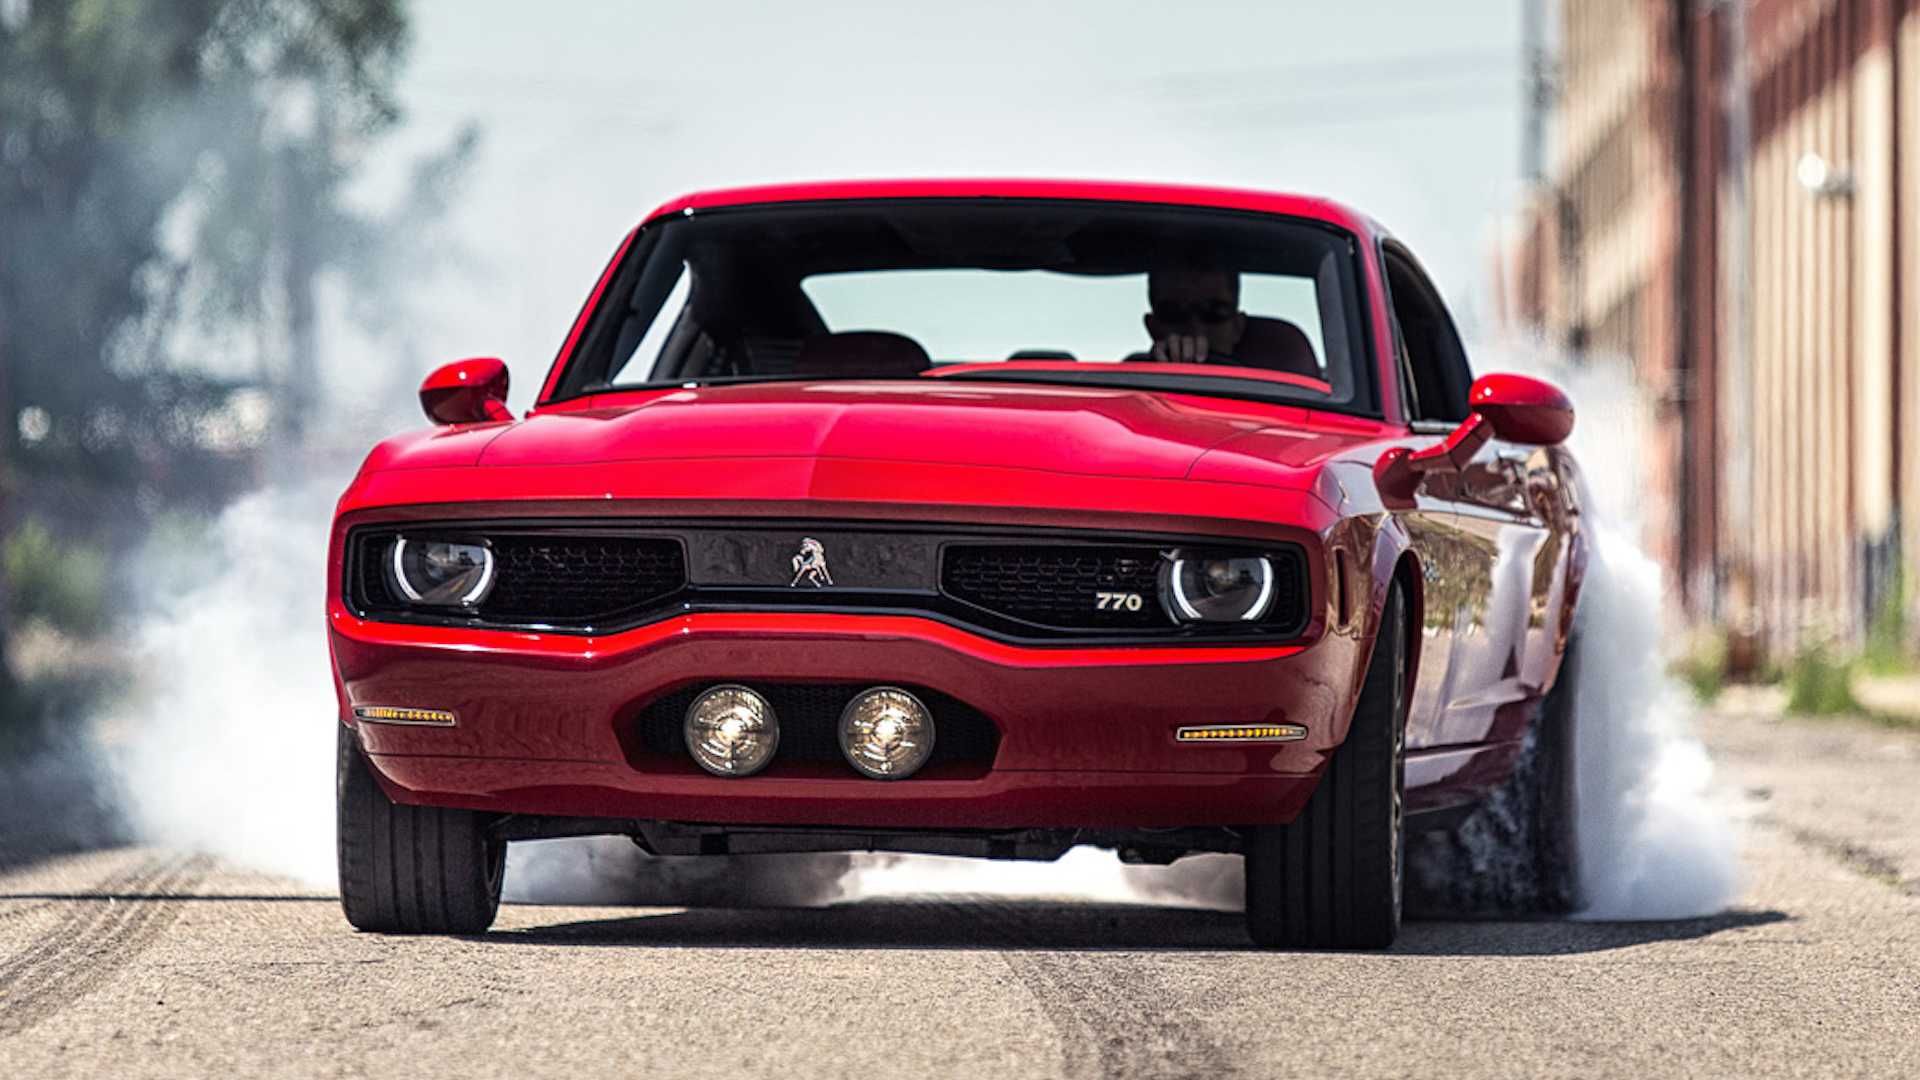 Red Equus Bass 770 on the road